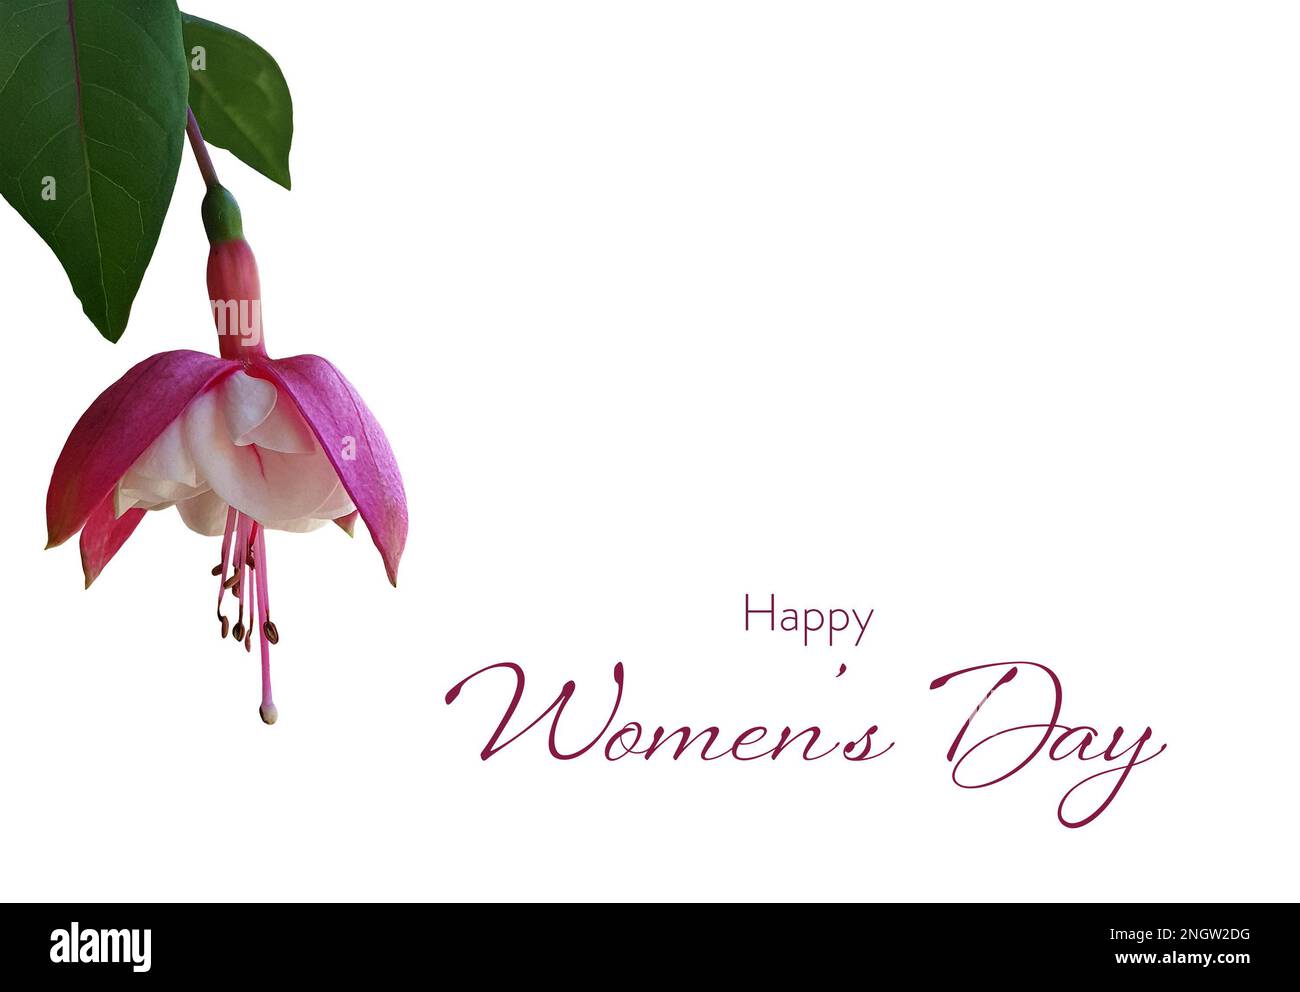 Happy Womens Day card with single fuchsia flower isolated on white background Stock Photo